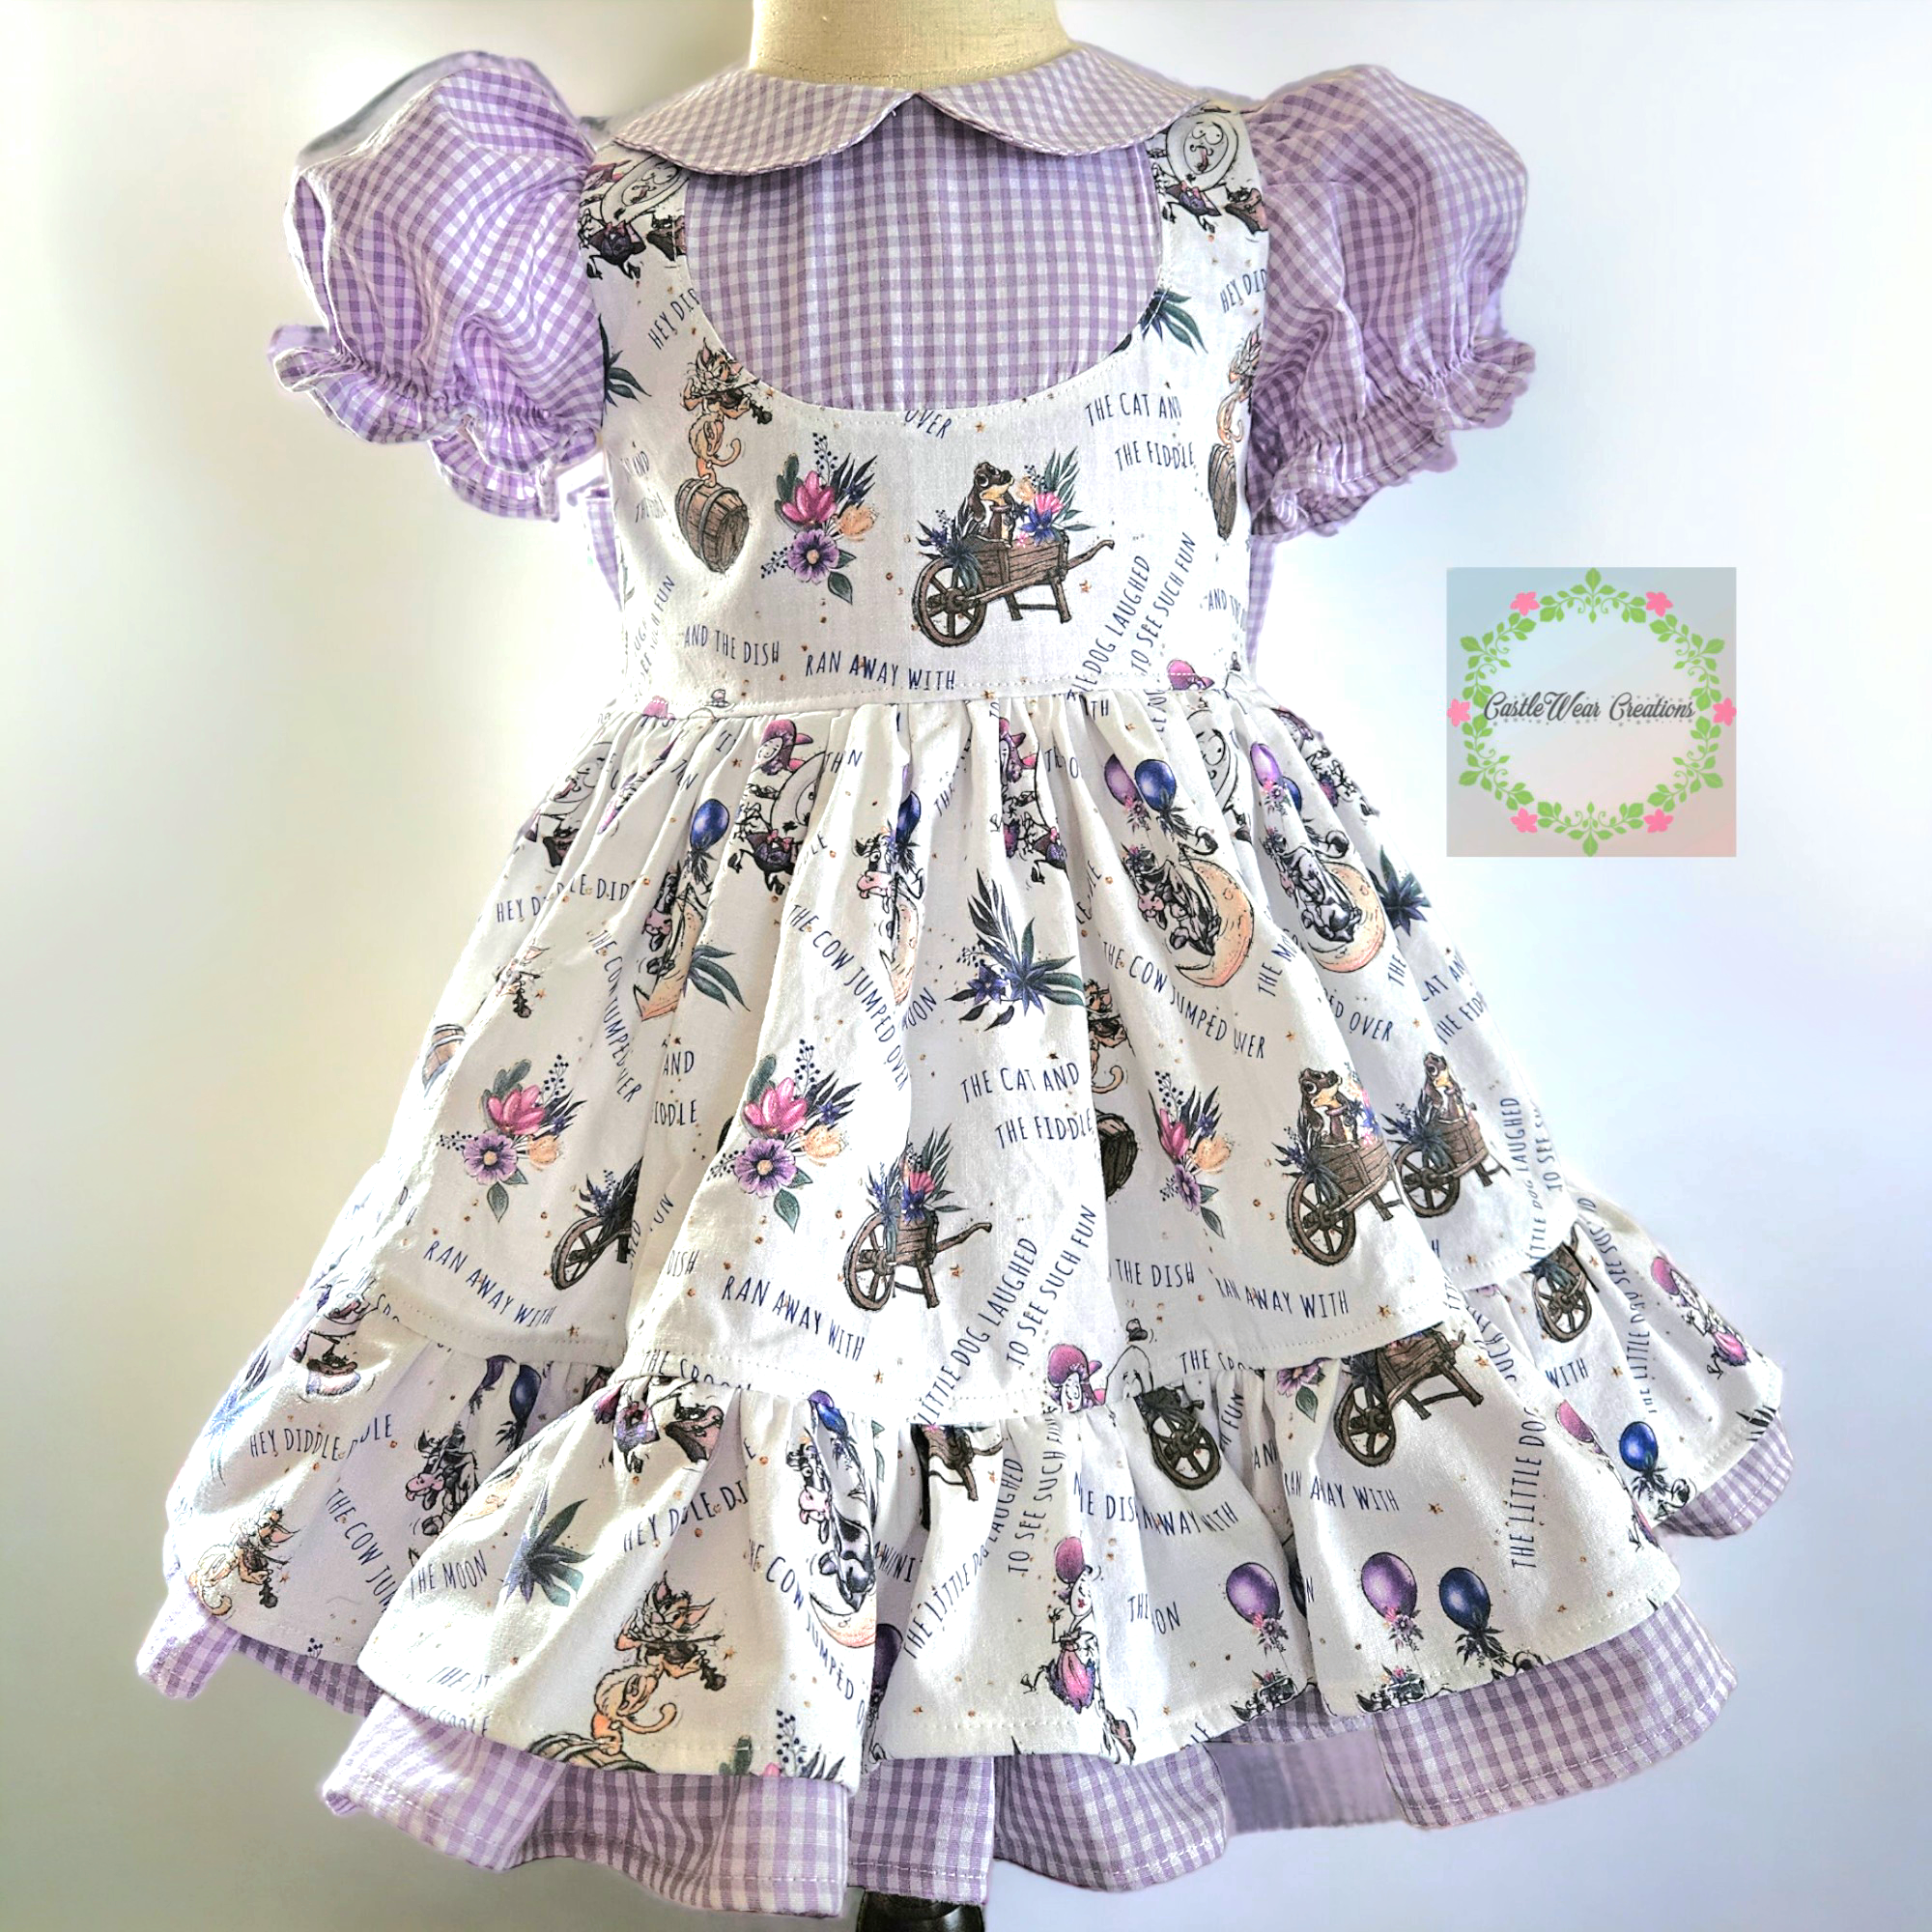 The Little Dog Laughed Dress